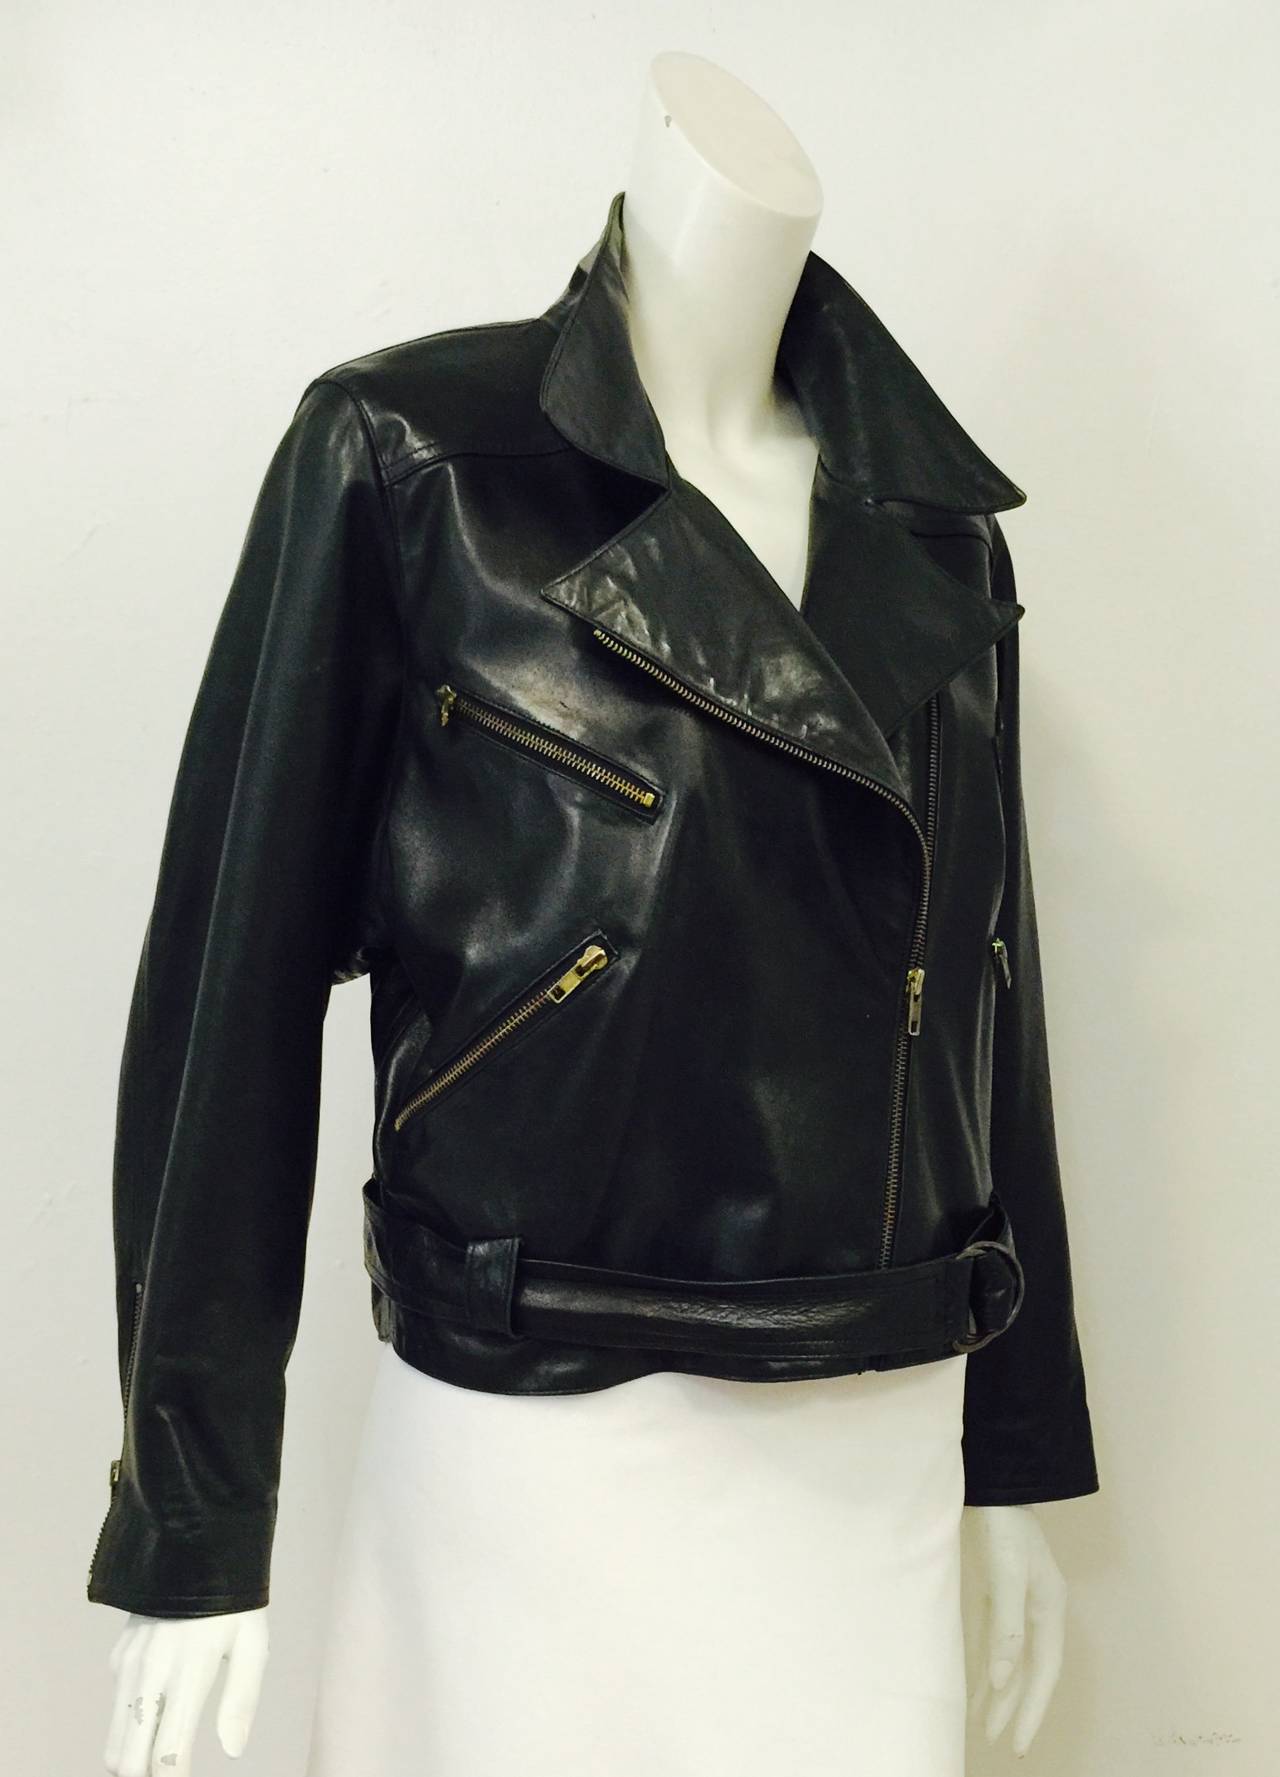 Lambskin Biker Jacket proves that Sonia Rykiel is much more than the 